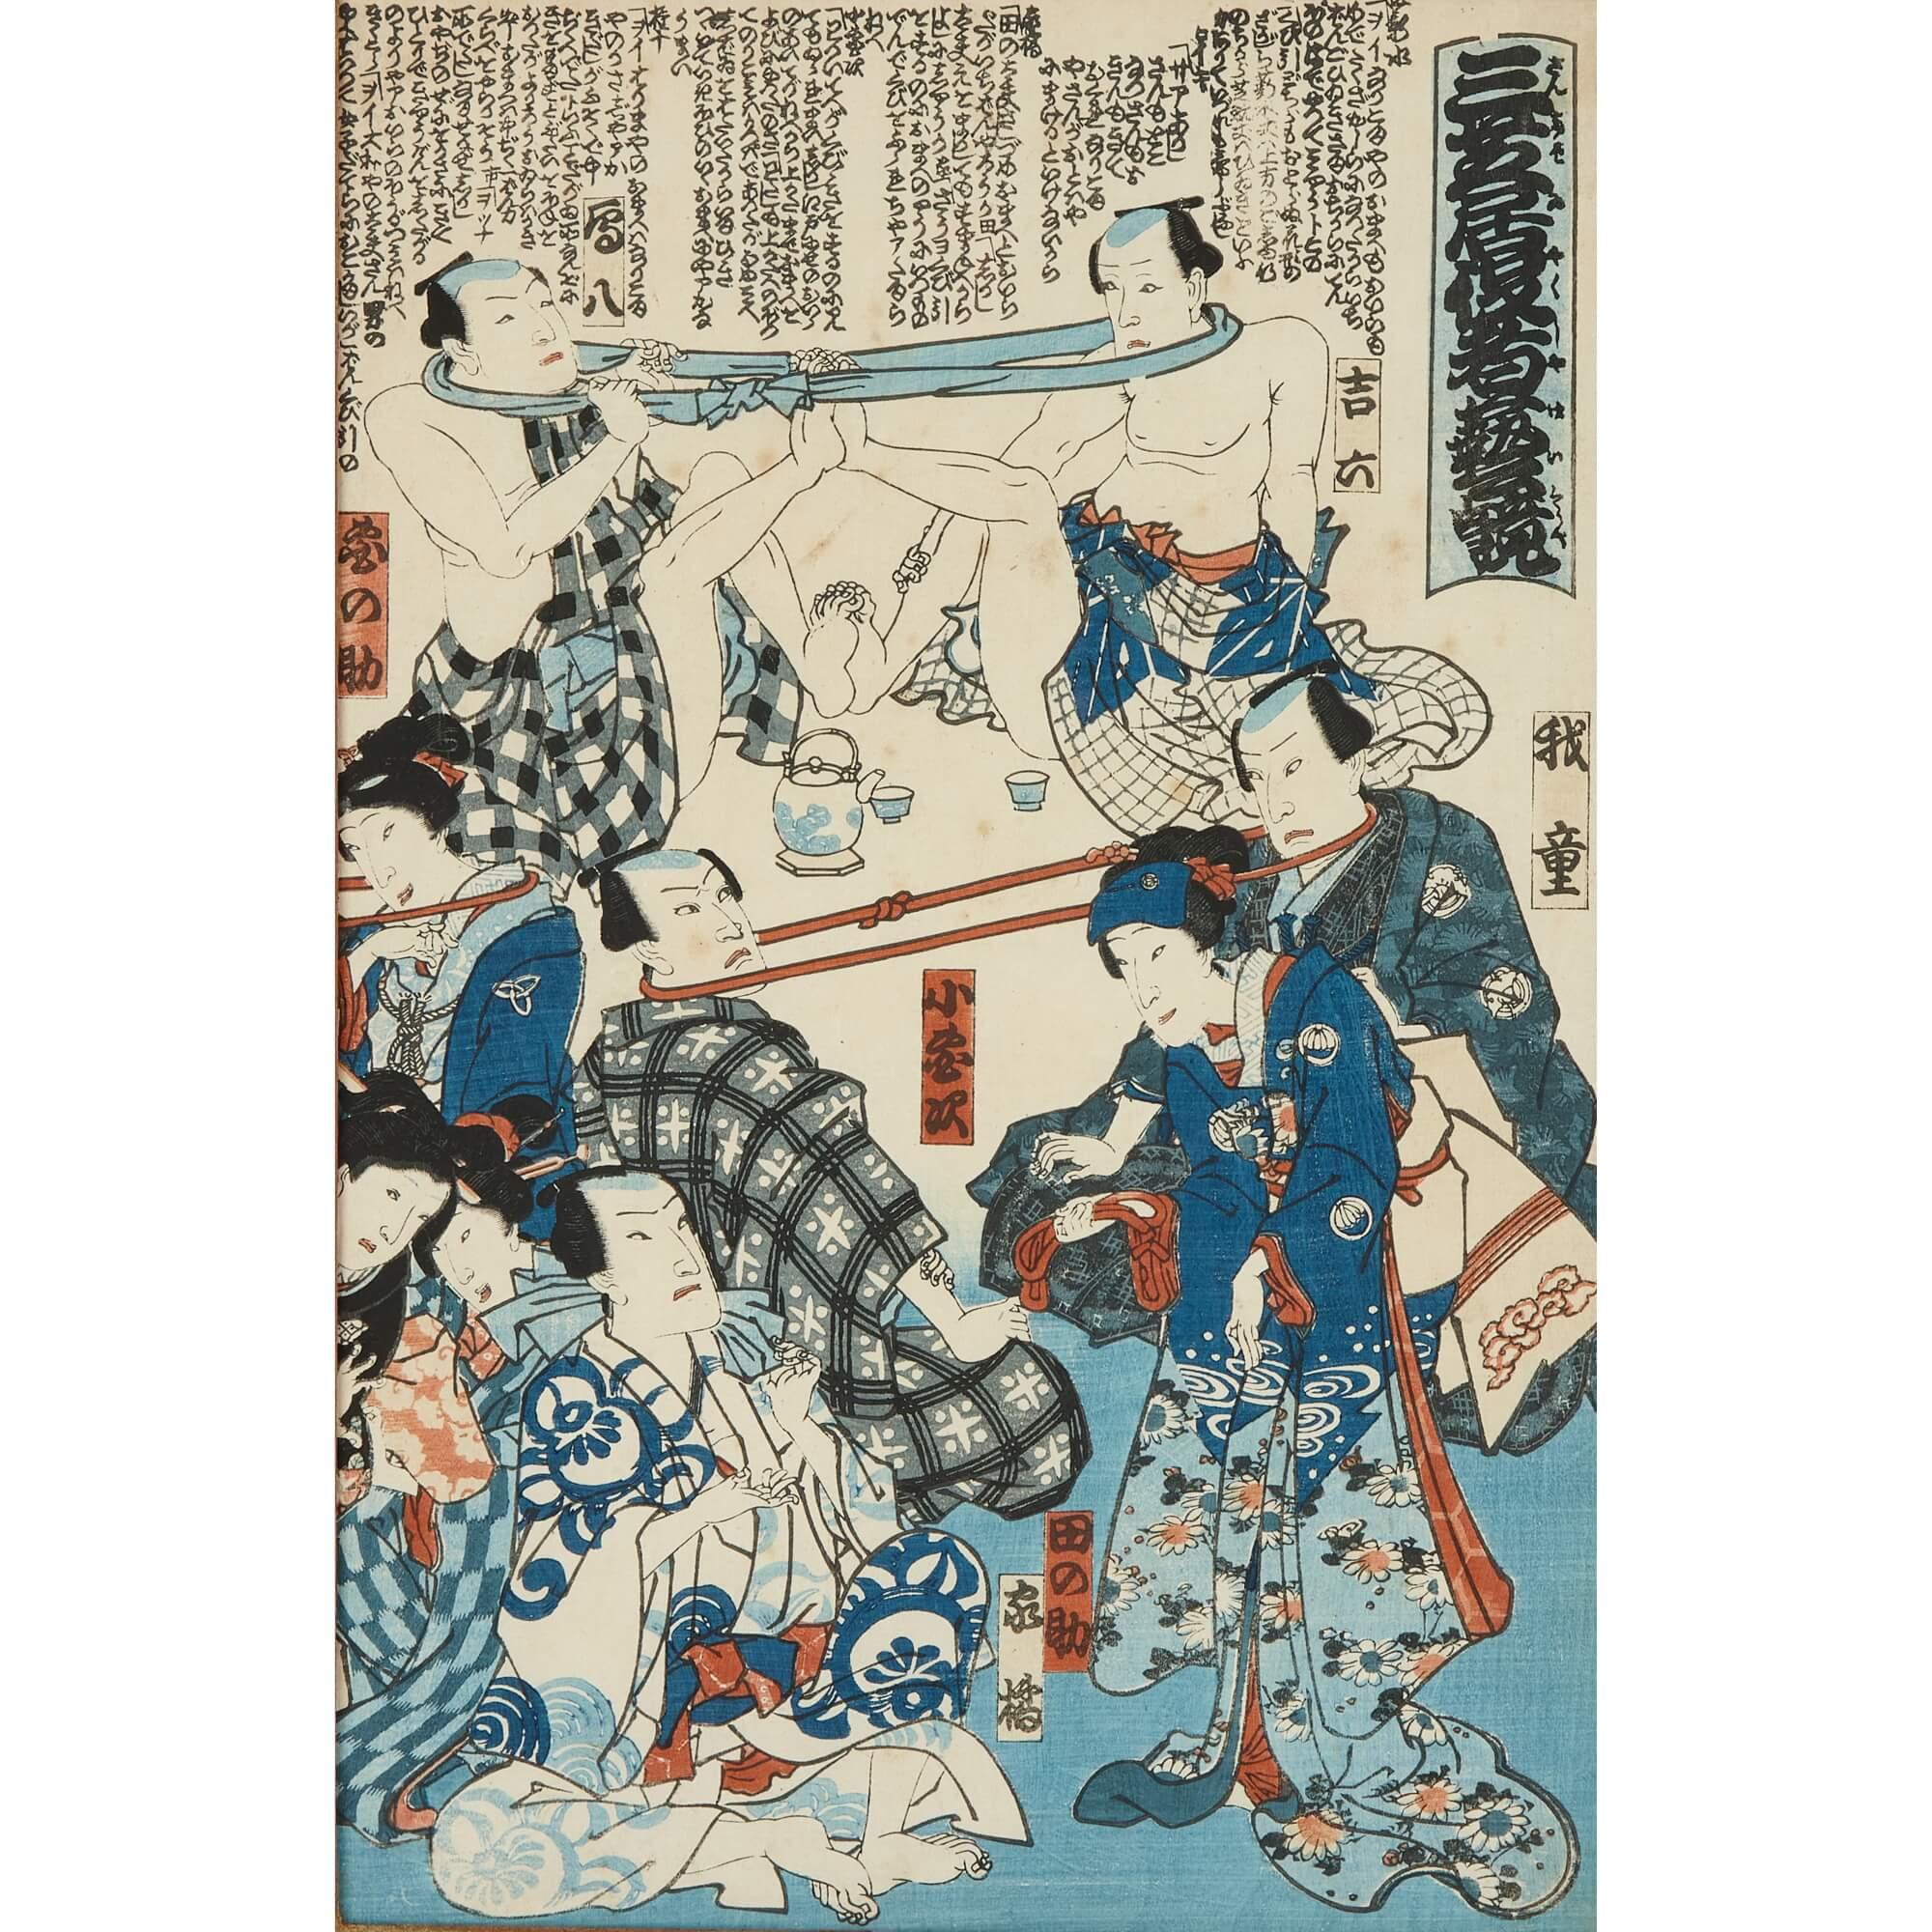 A set of eight Japanese Meiji era woodblock prints
Japanese, Late 19th century
Measures: Frames: small: height 50cm, width 37cm, depth 1.5cm - prints 35 x 24
Large: height 52cm, width 38cm, depth 1.5cm - prints 35 x 22

This remarkable and